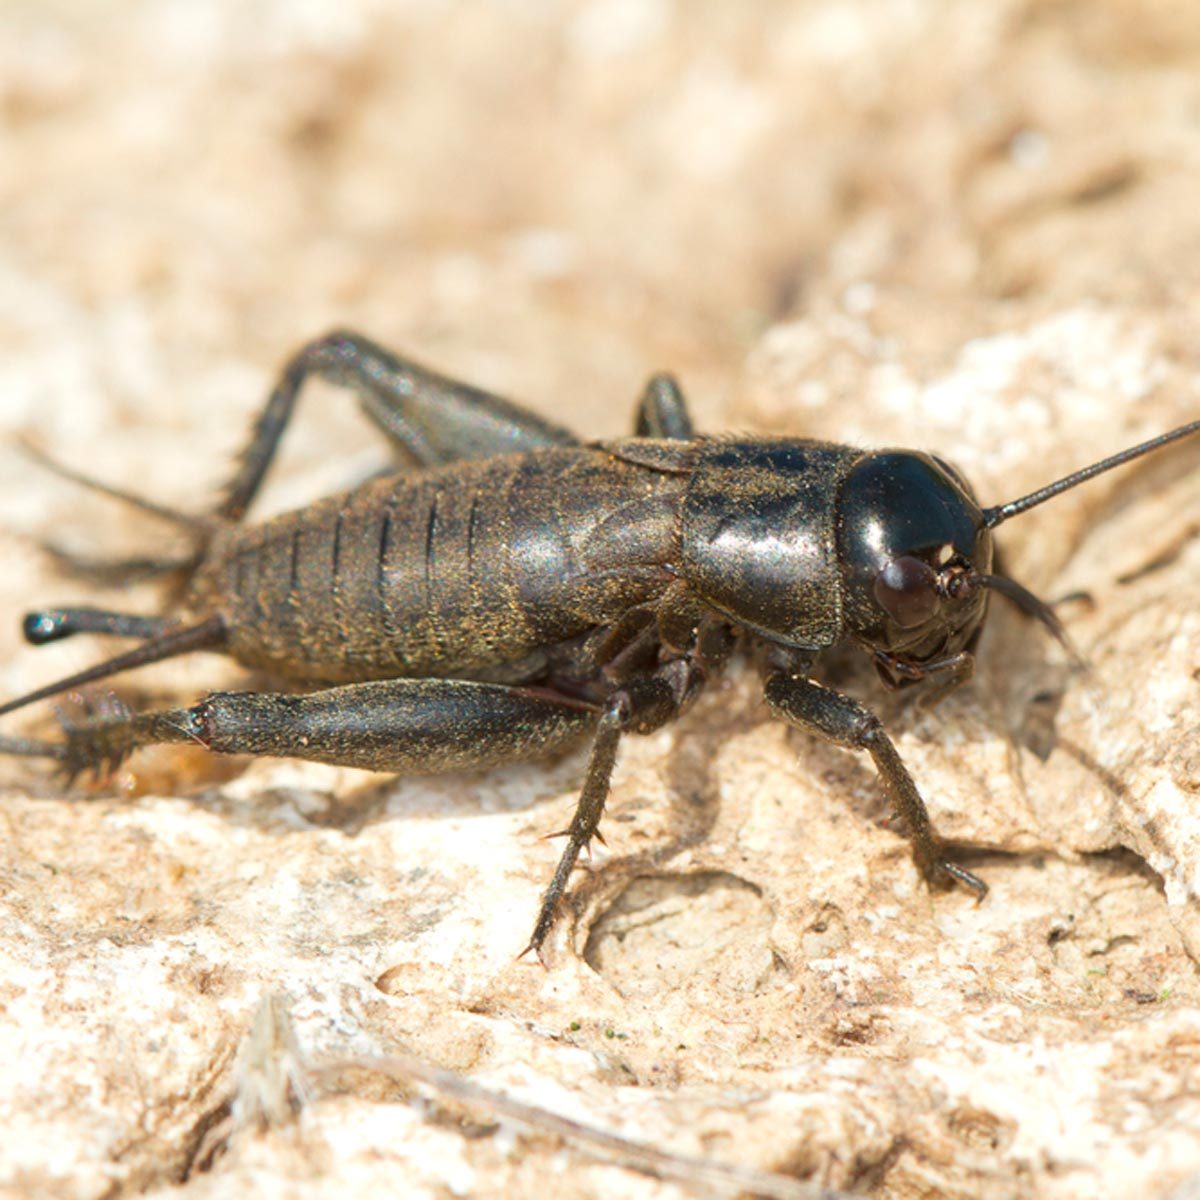 How to Get Rid of Crickets